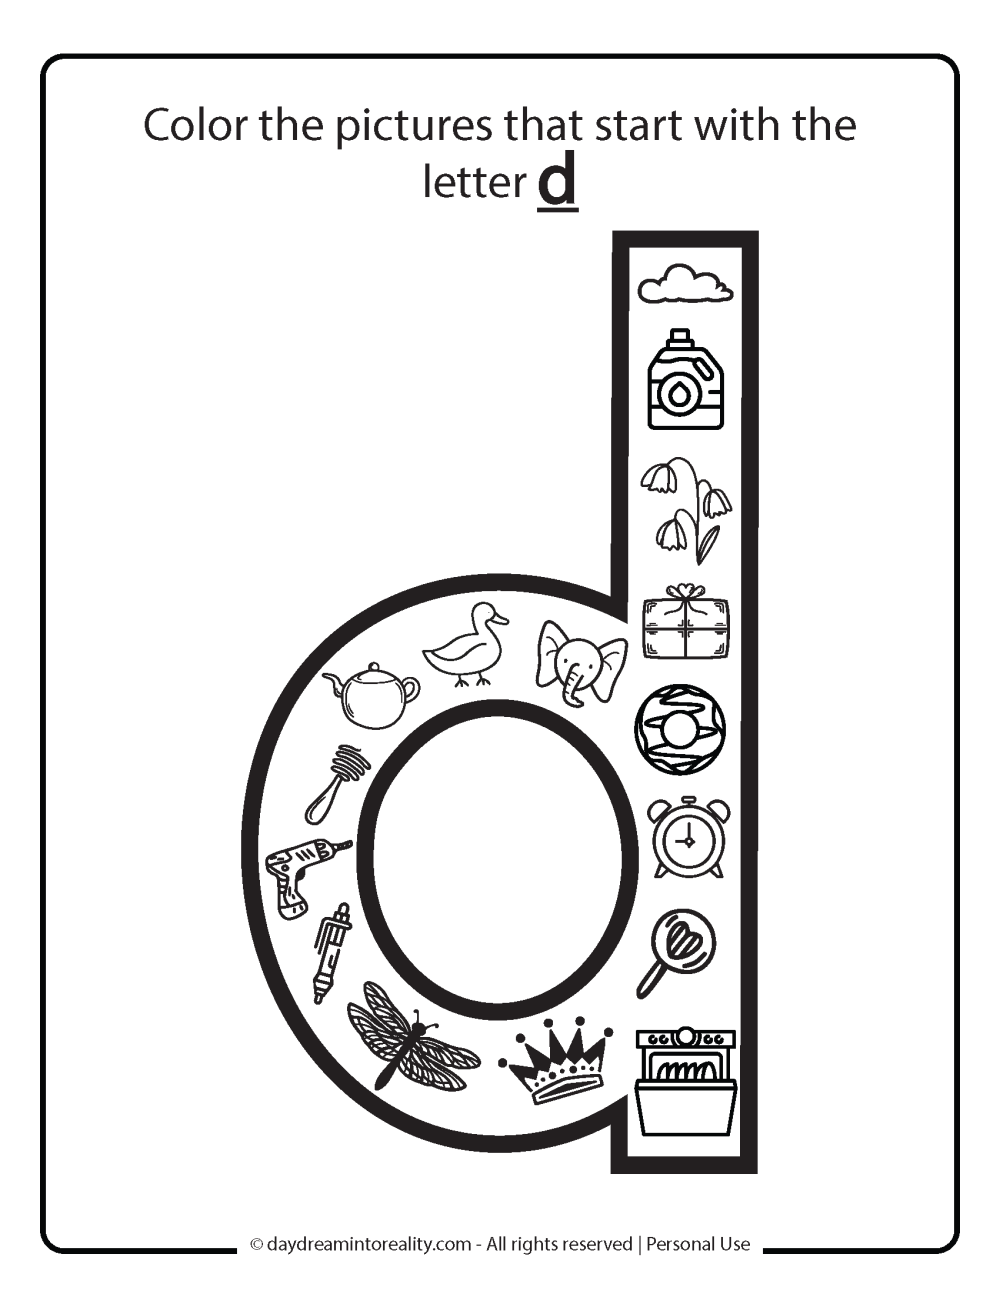 Letter D worksheet free printables - color picture that starts with D